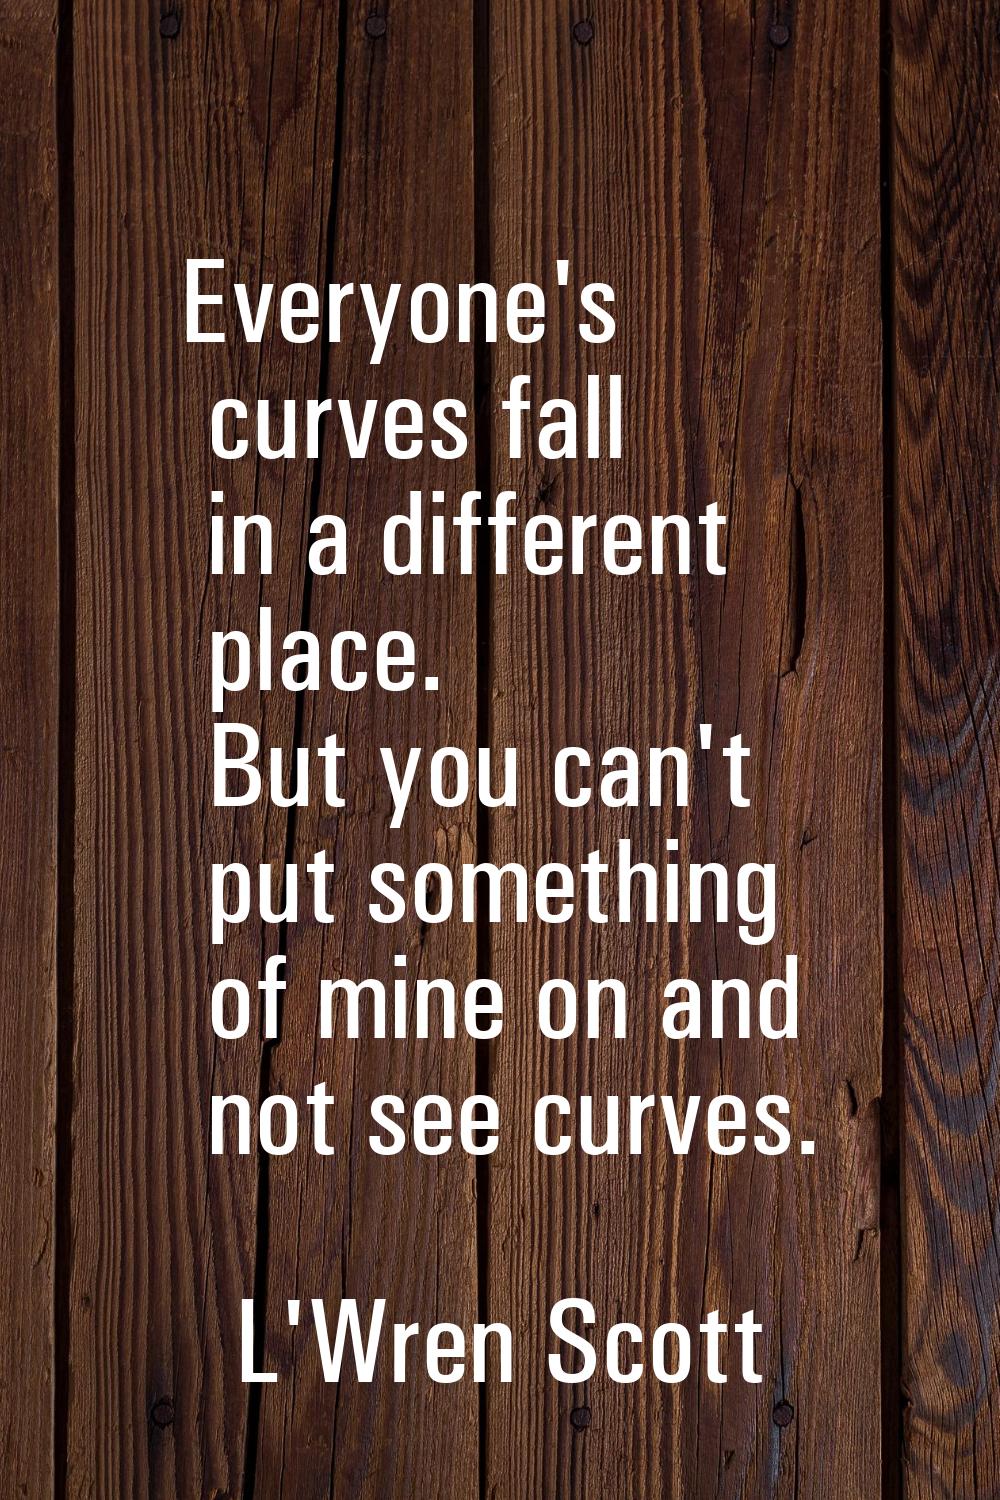 Everyone's curves fall in a different place. But you can't put something of mine on and not see cur